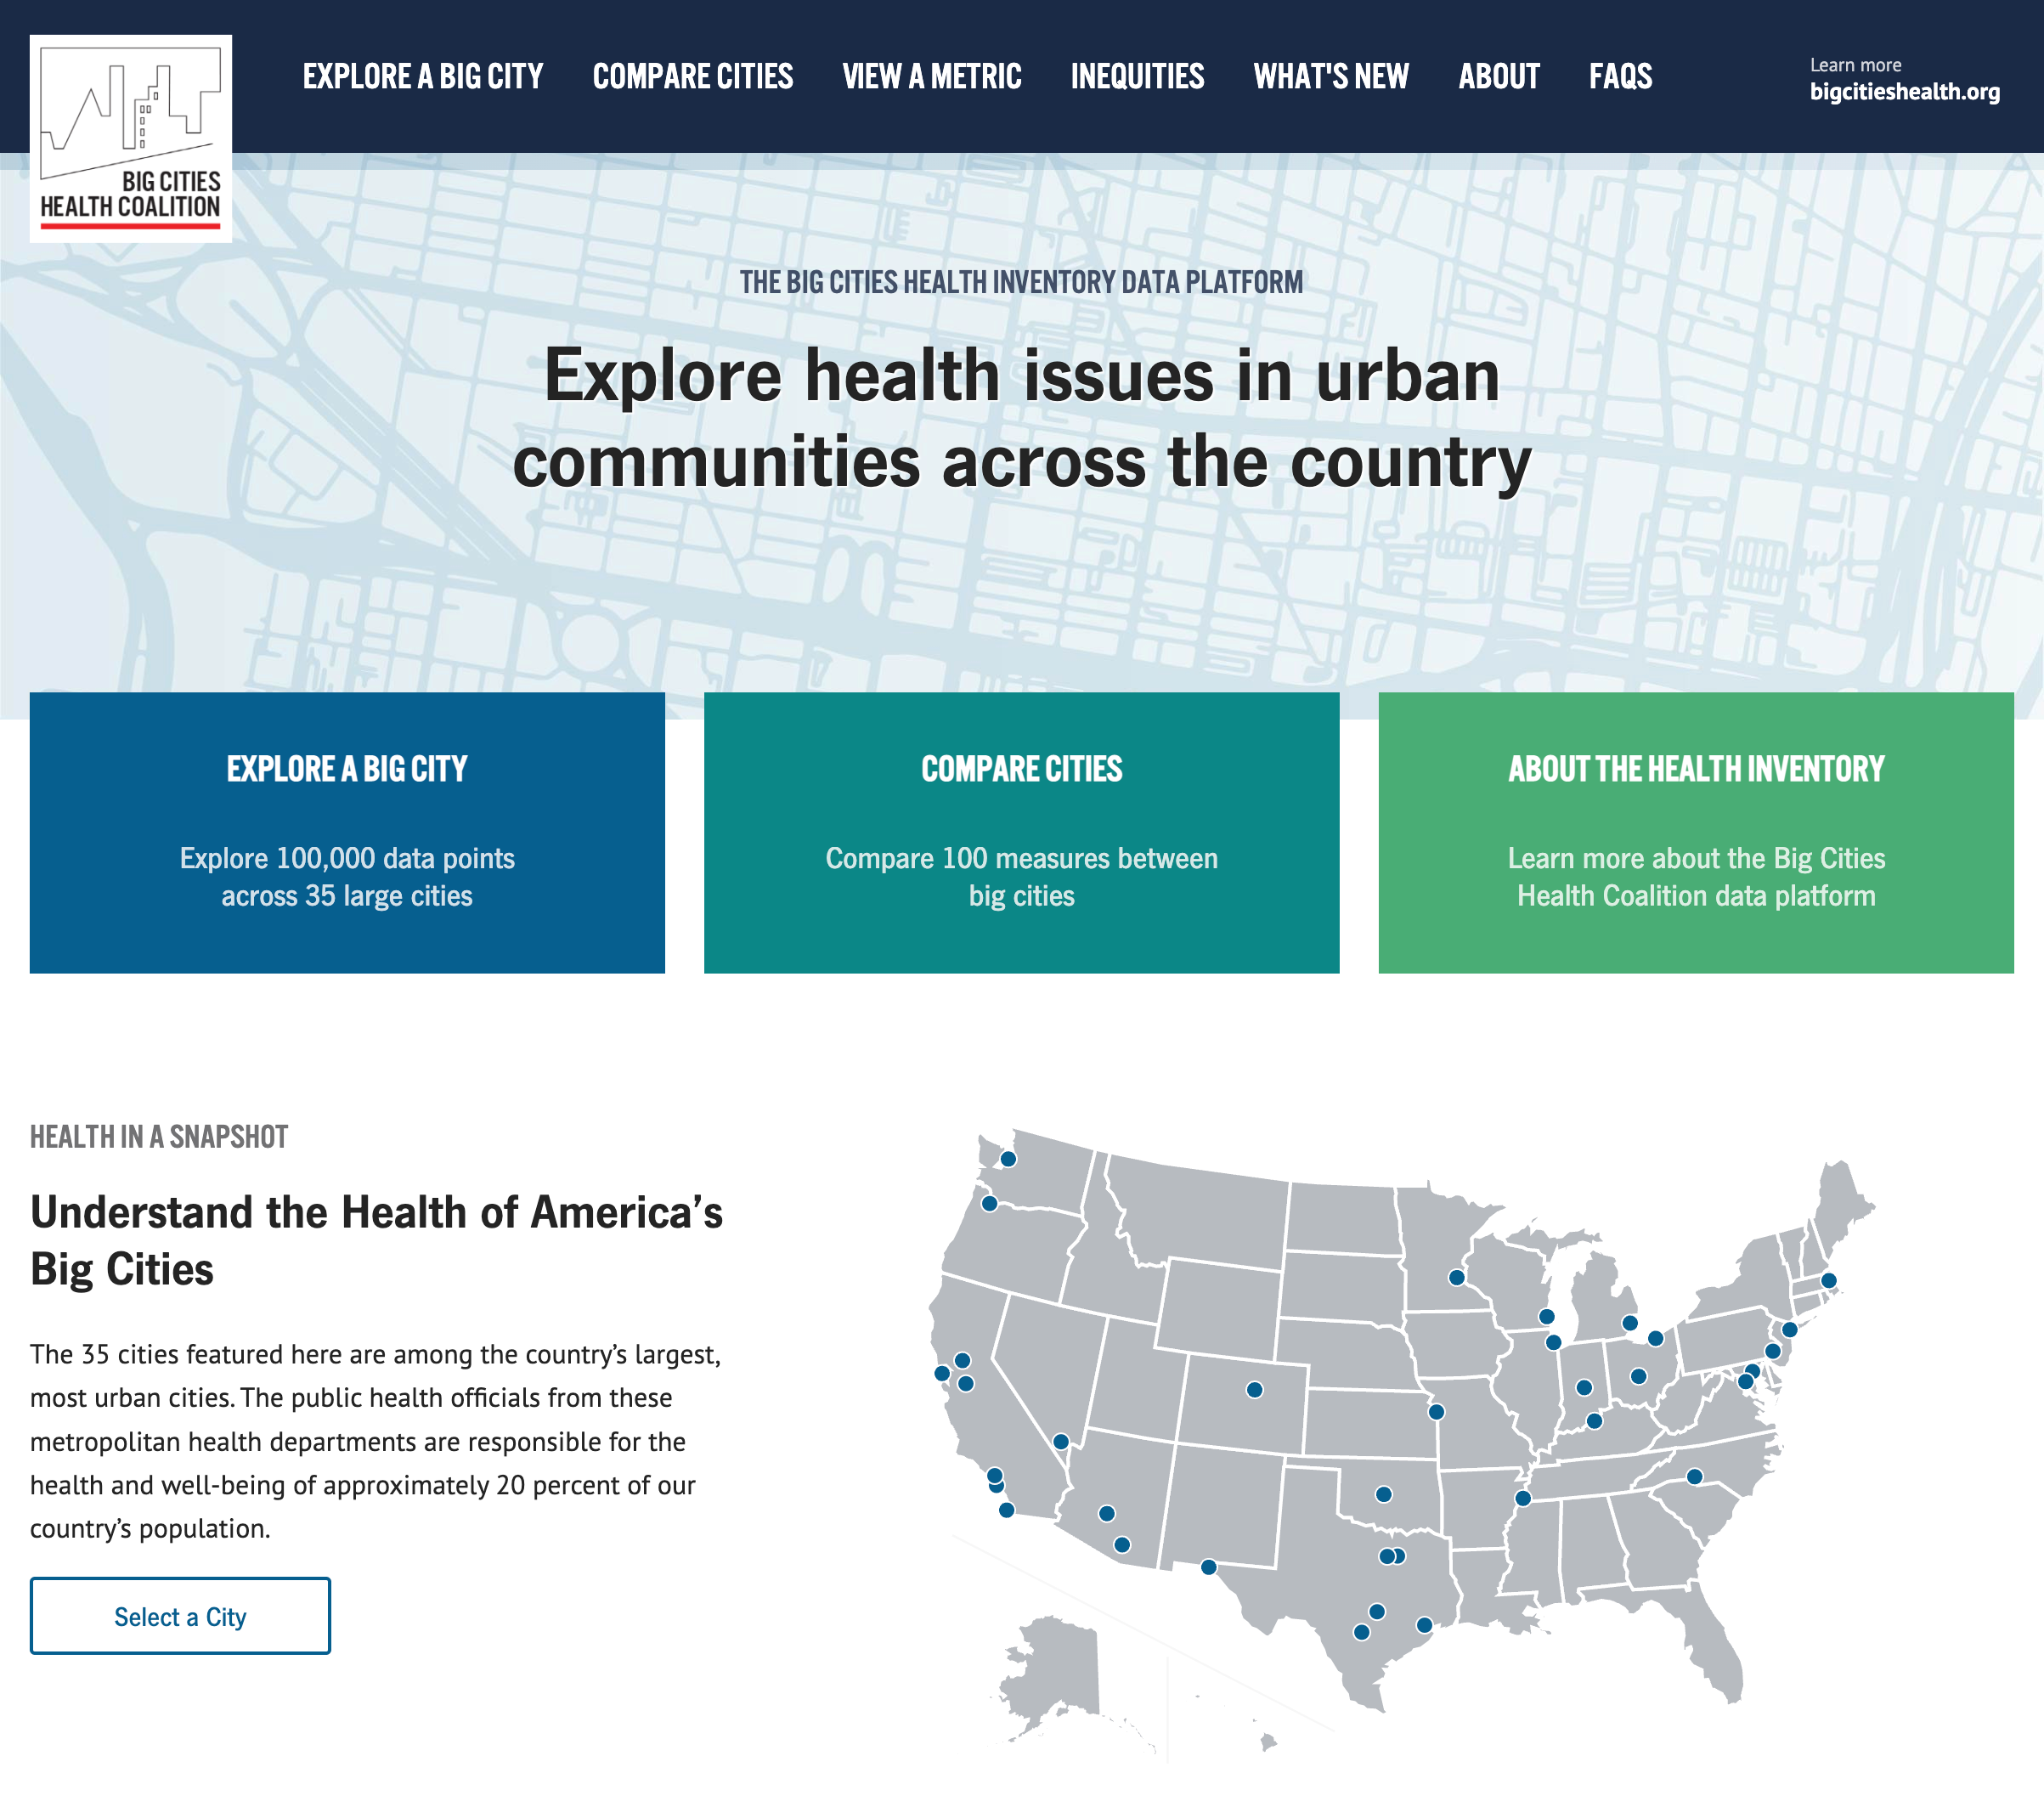 The Big Cities Health Data Inventory Platform homepage, featuring several buttons that take the user to filtered pages and a physical map outlining all the available cities with data.